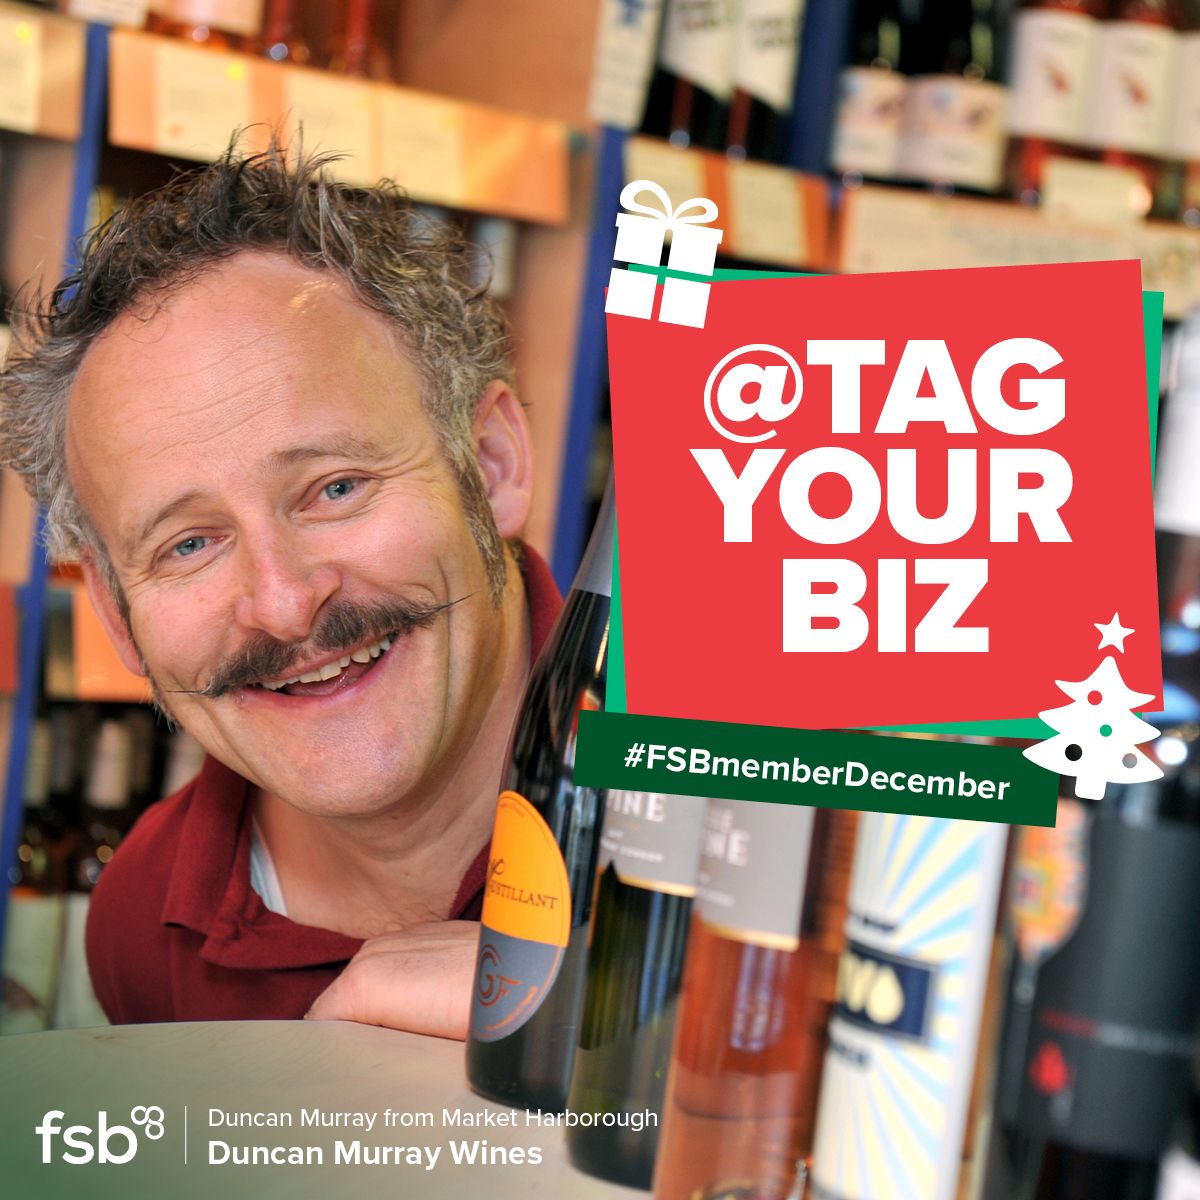 Our FSB members have shared some amazing stories as part of #FSBmemberDecember. Today, we'd like you to share some info about your business. Tell us a bit about what you do, and tag your company’s social profile below for your chance to win today’s FSB Festive Gift Box!